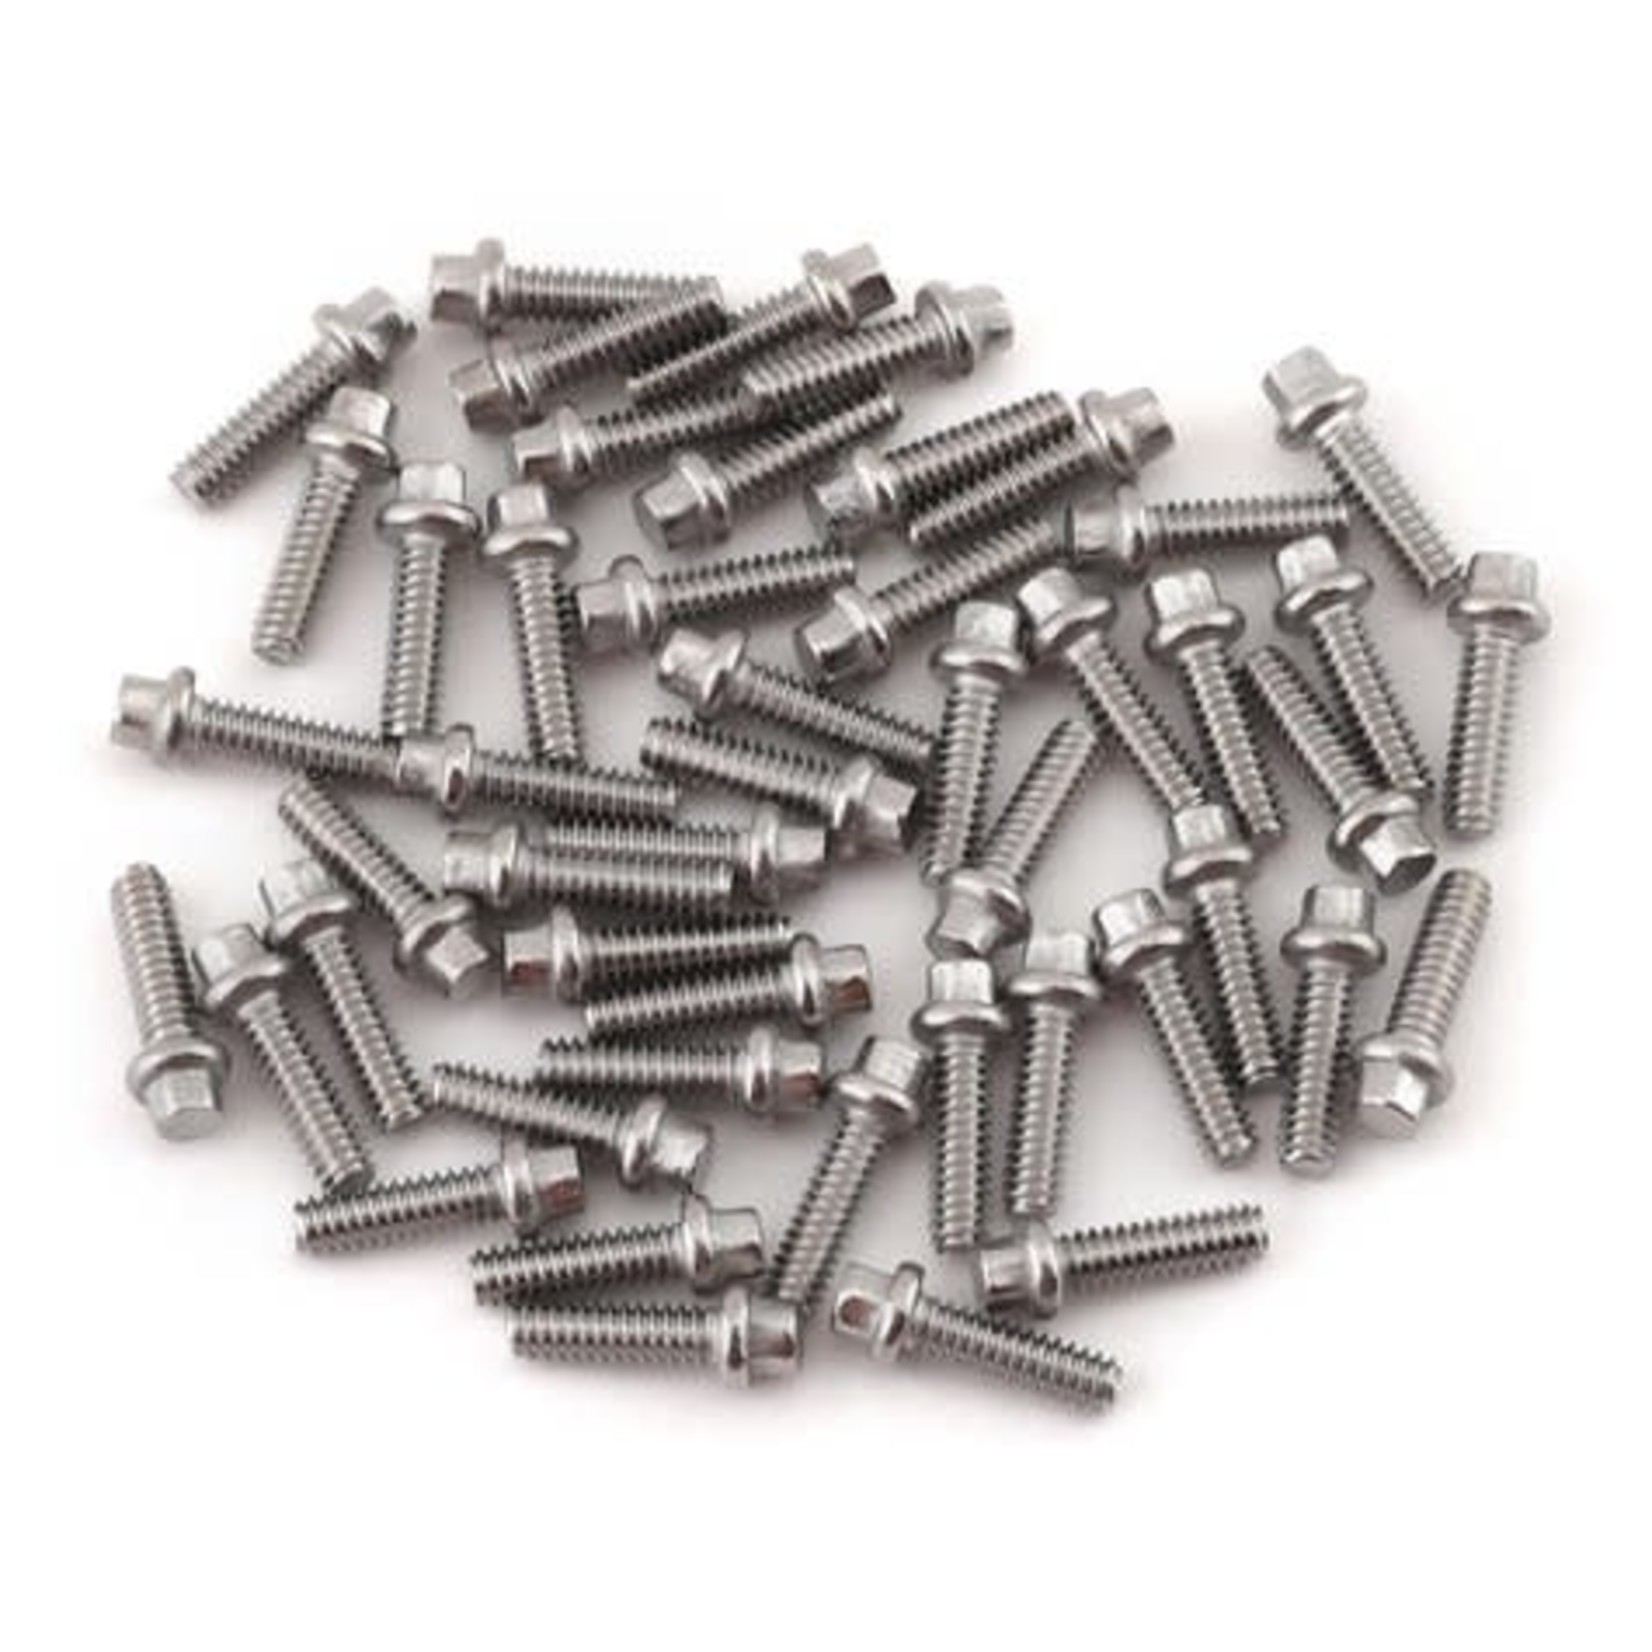 Vanquish Products Vanquish Products Scale Beadlock Ring Screw Kit (Stainless) (50) #VPS05002